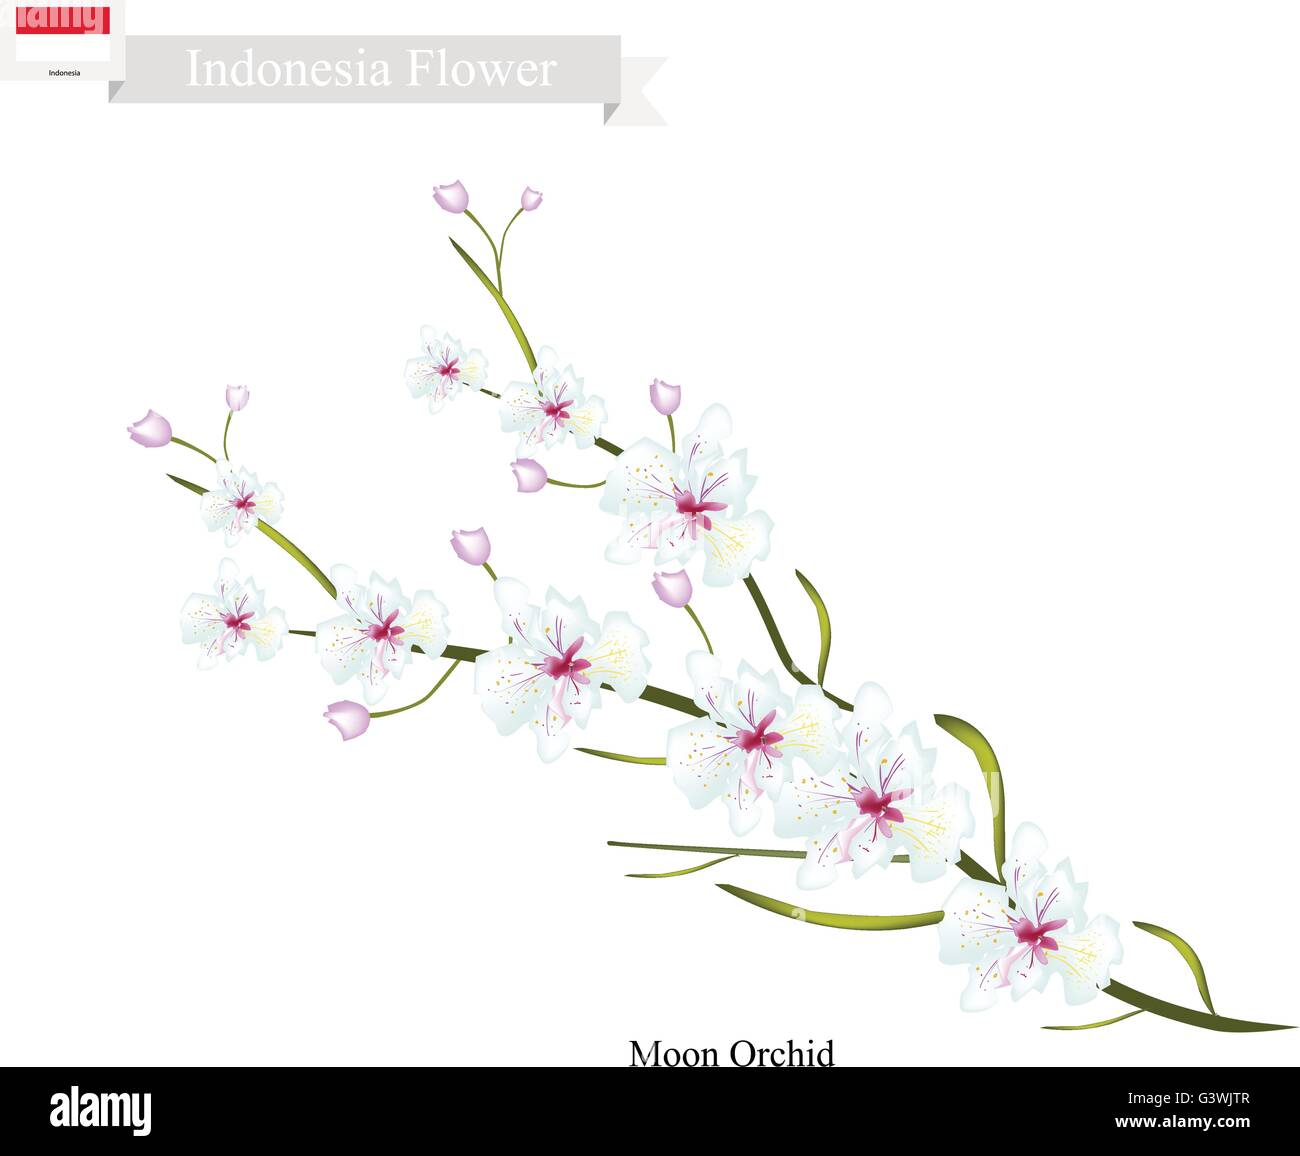 Indonesia Flower, Illustration of Moon Orchids Flowers. The Flower of Charm of Indonesia. Stock Vector